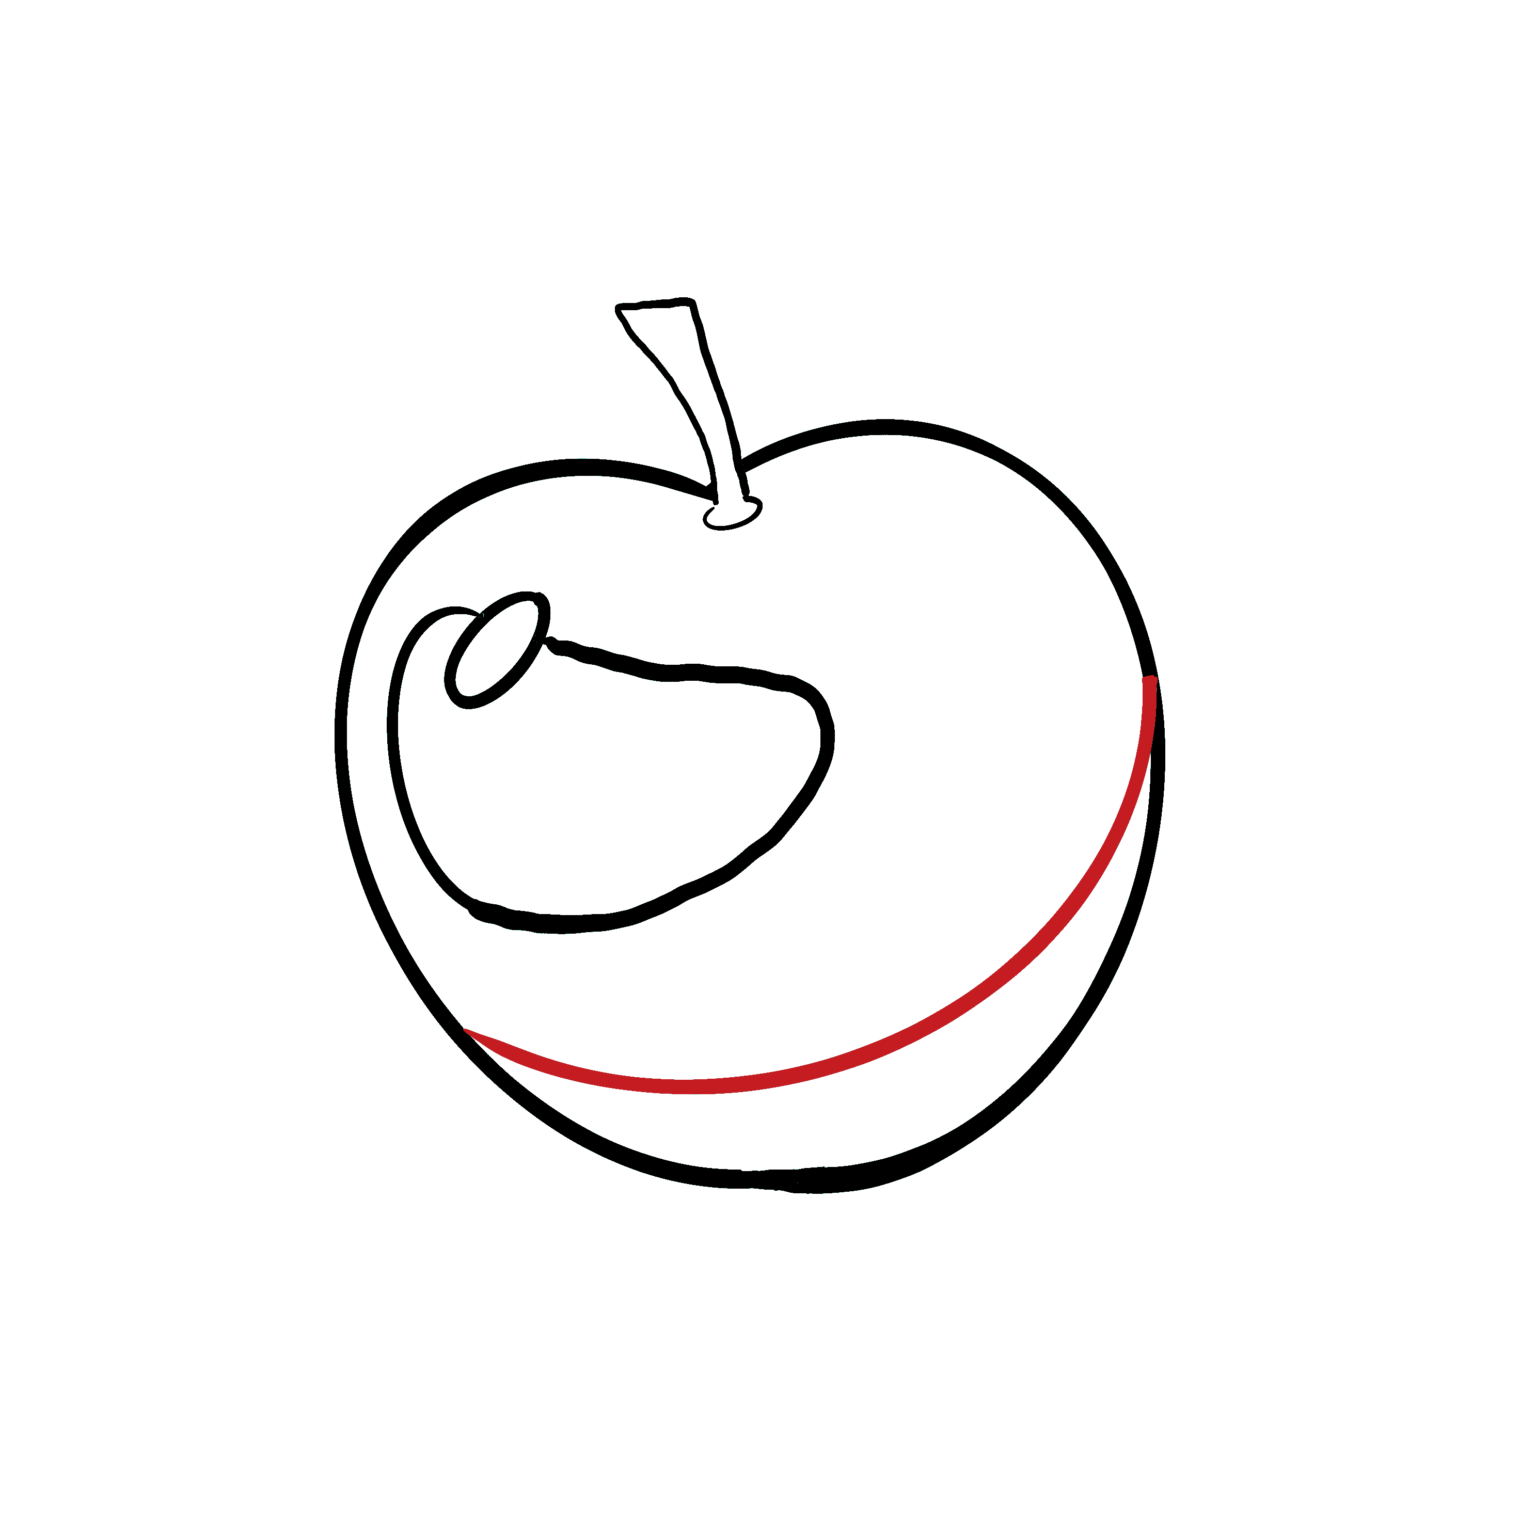 How to Draw an Apple